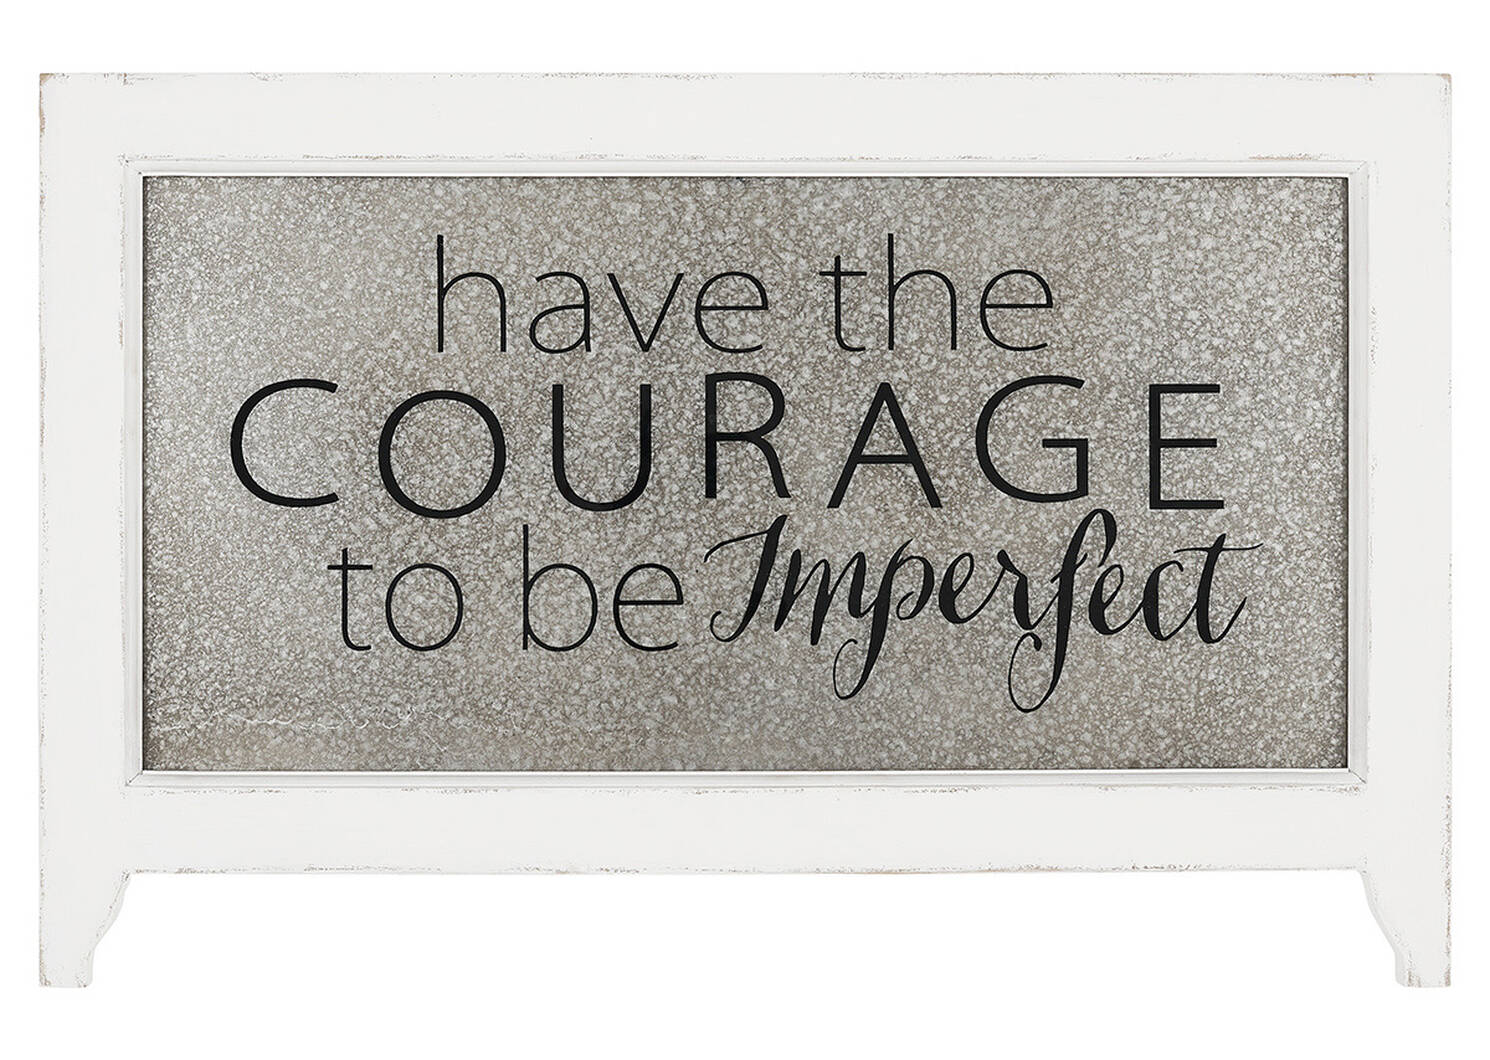 Courage Wall Plaque